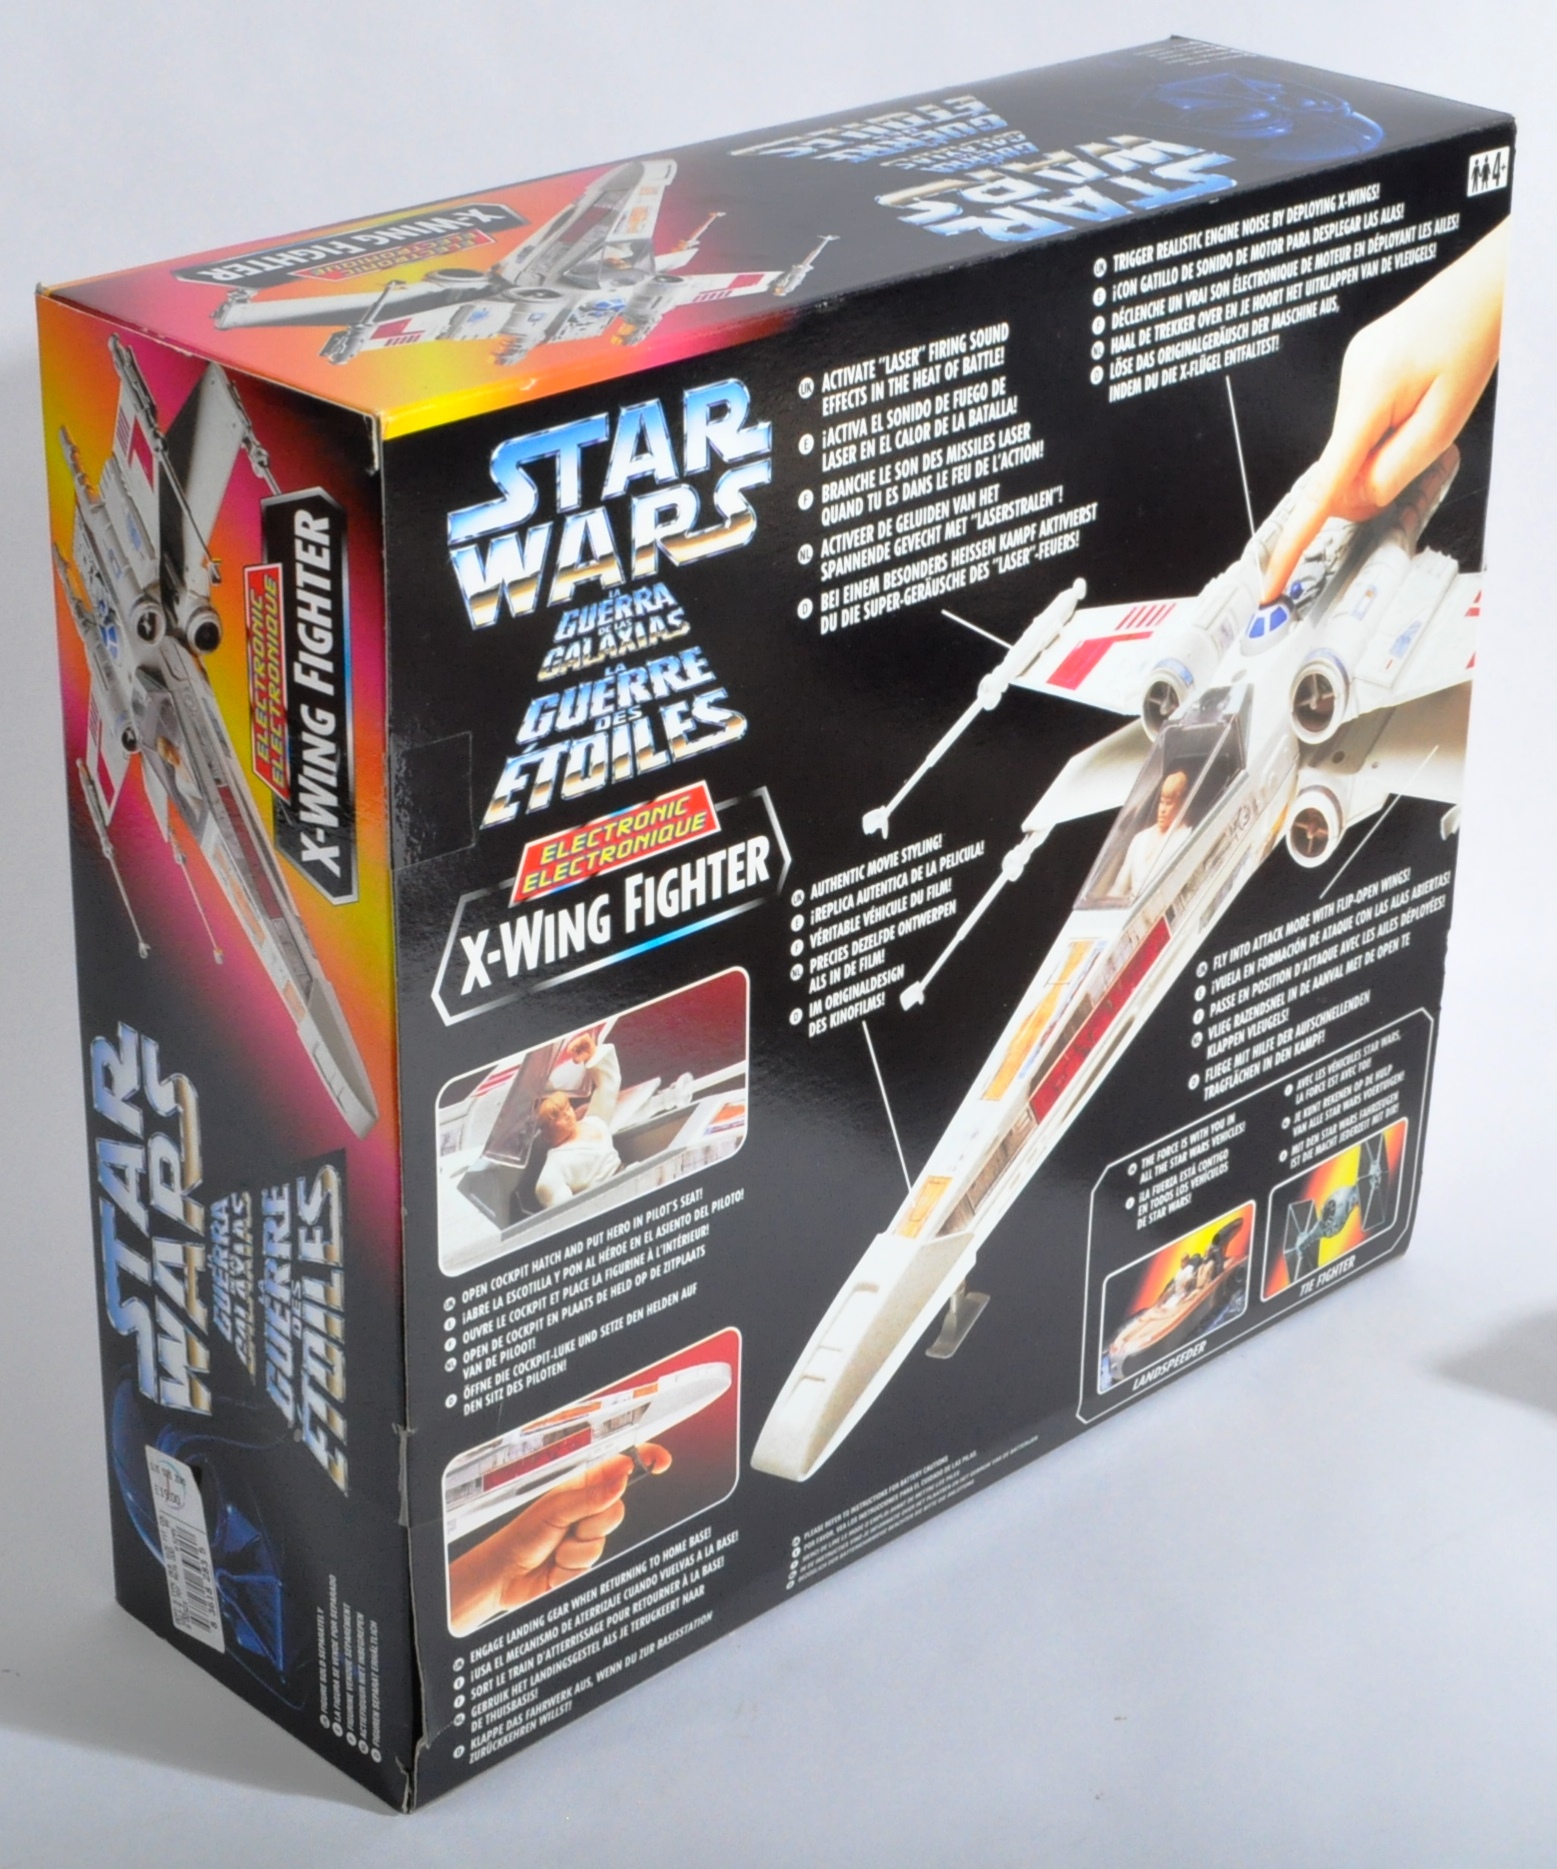 STAR WARS -VINTAGE KENNER BOXED ACTION FIGURE PLAYSET - Image 3 of 4